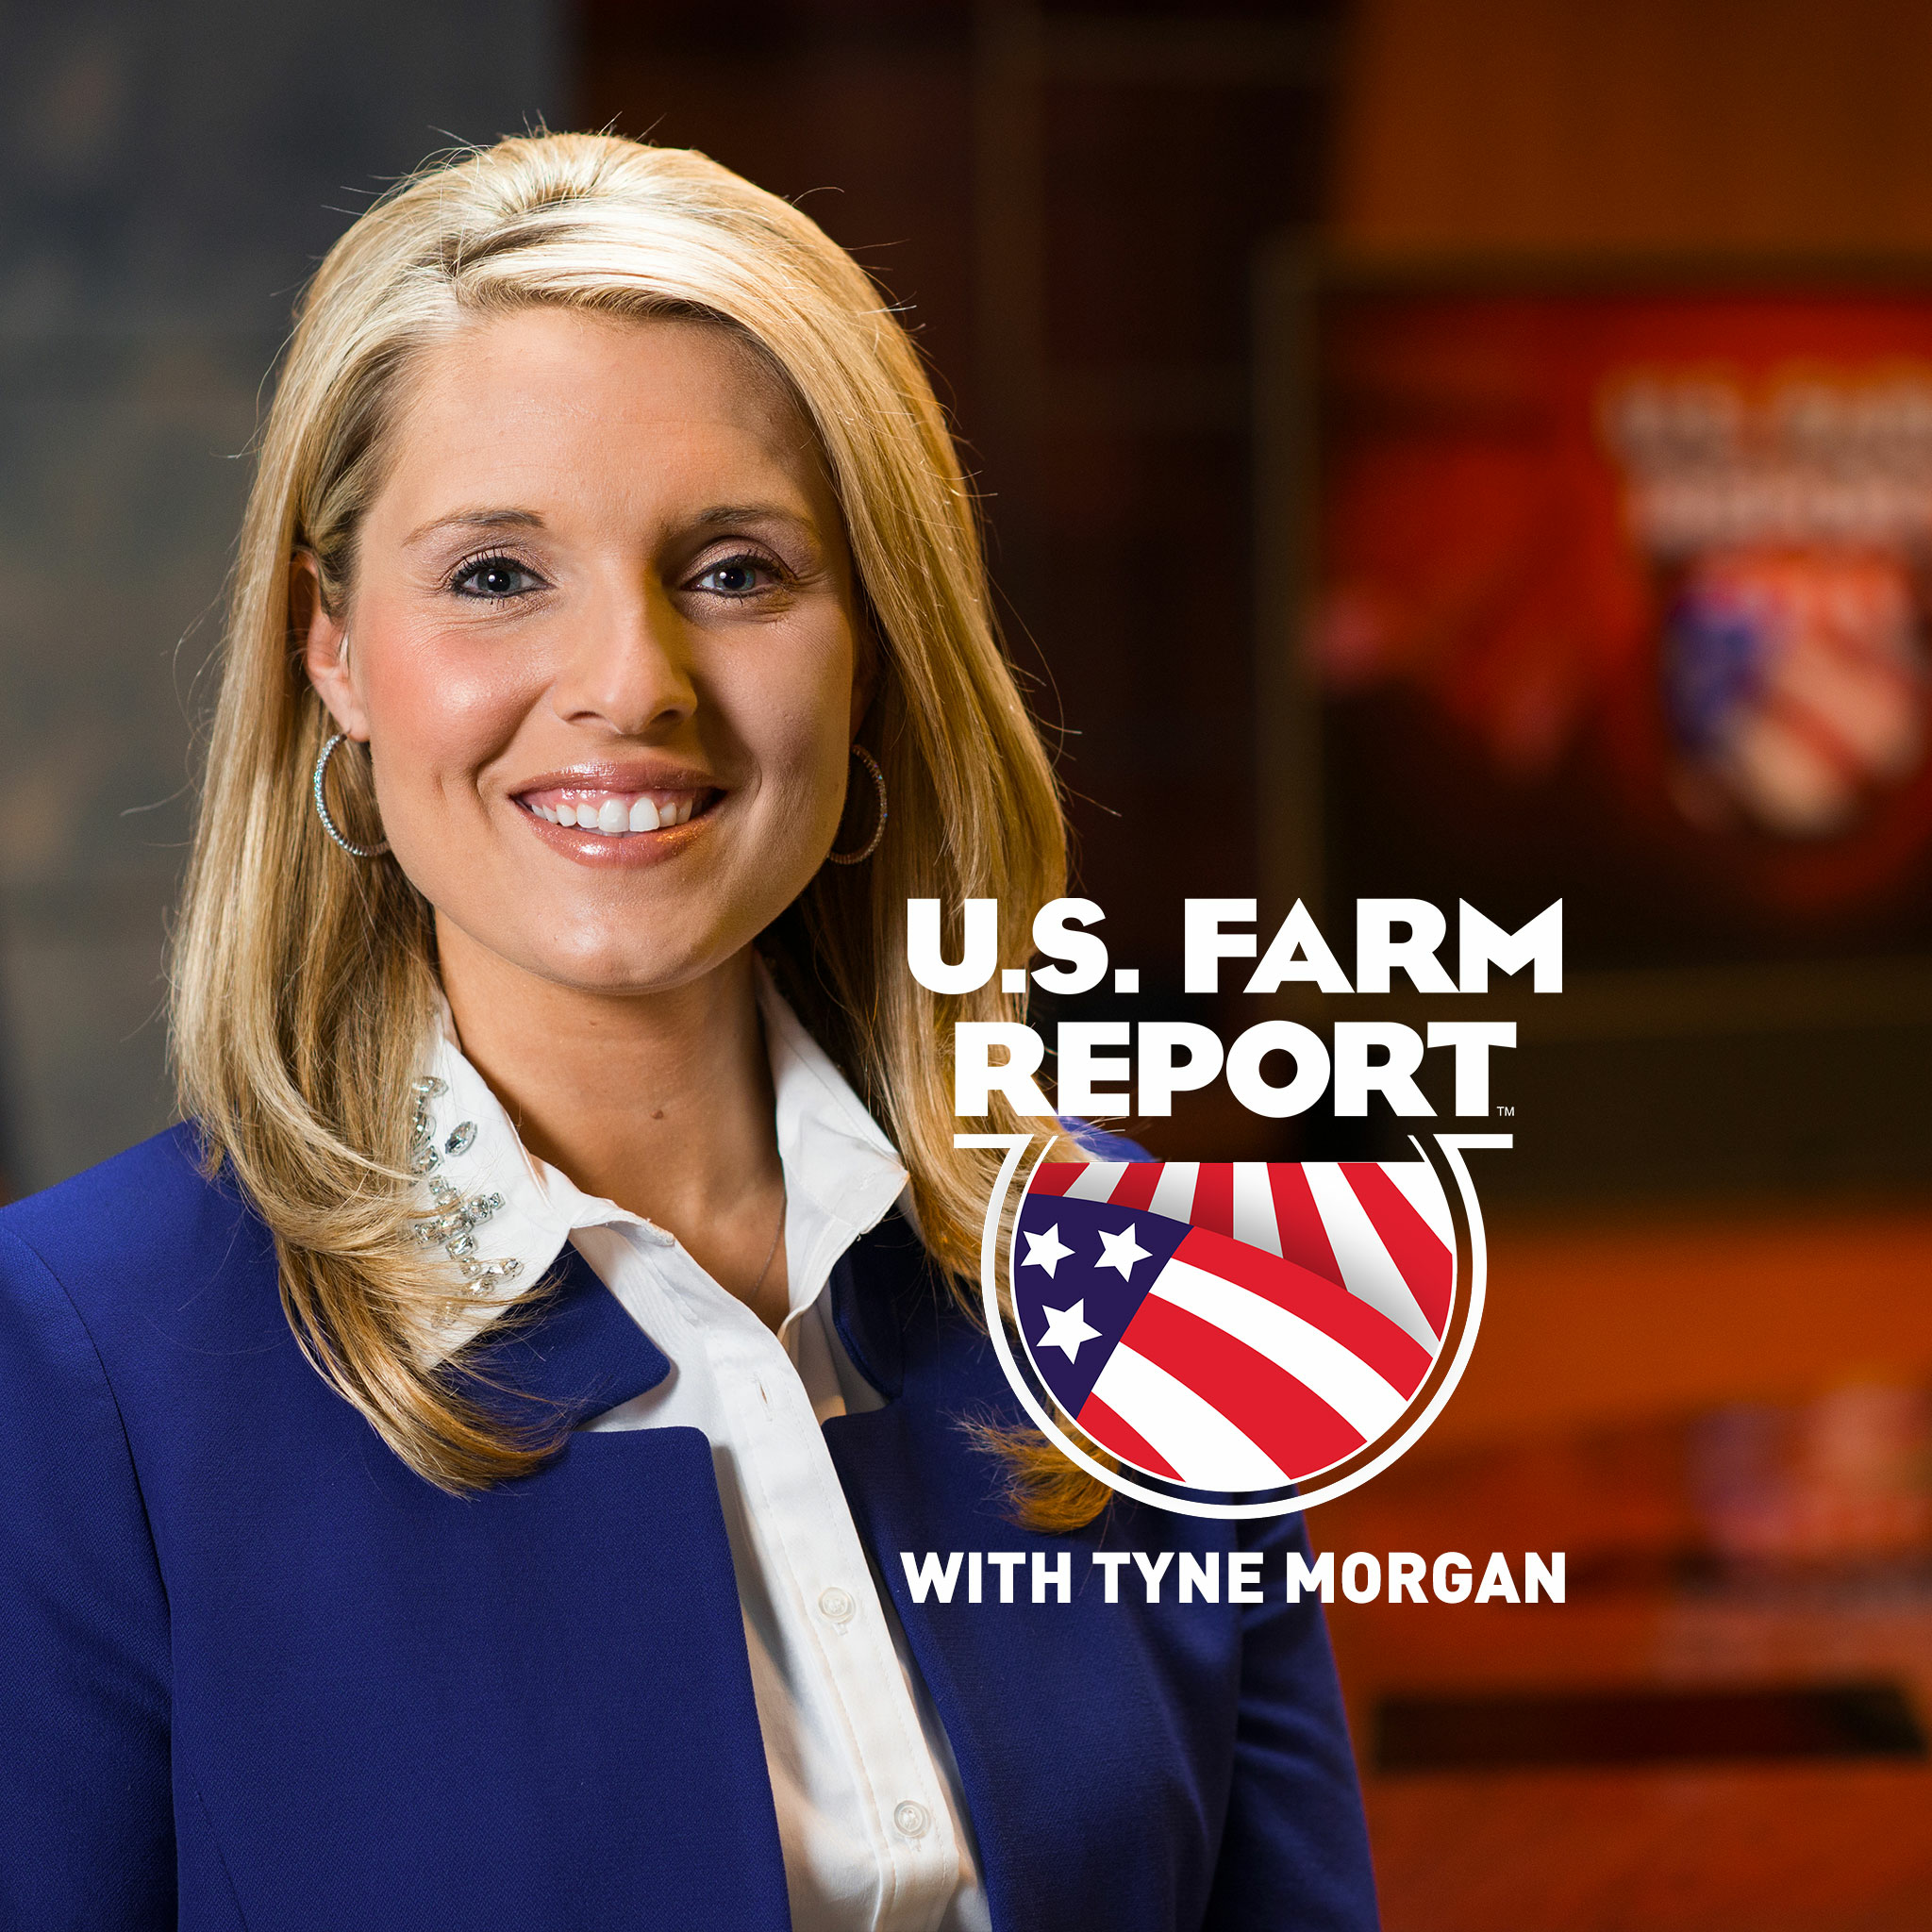 US Farm Report for January 23-24, 2021